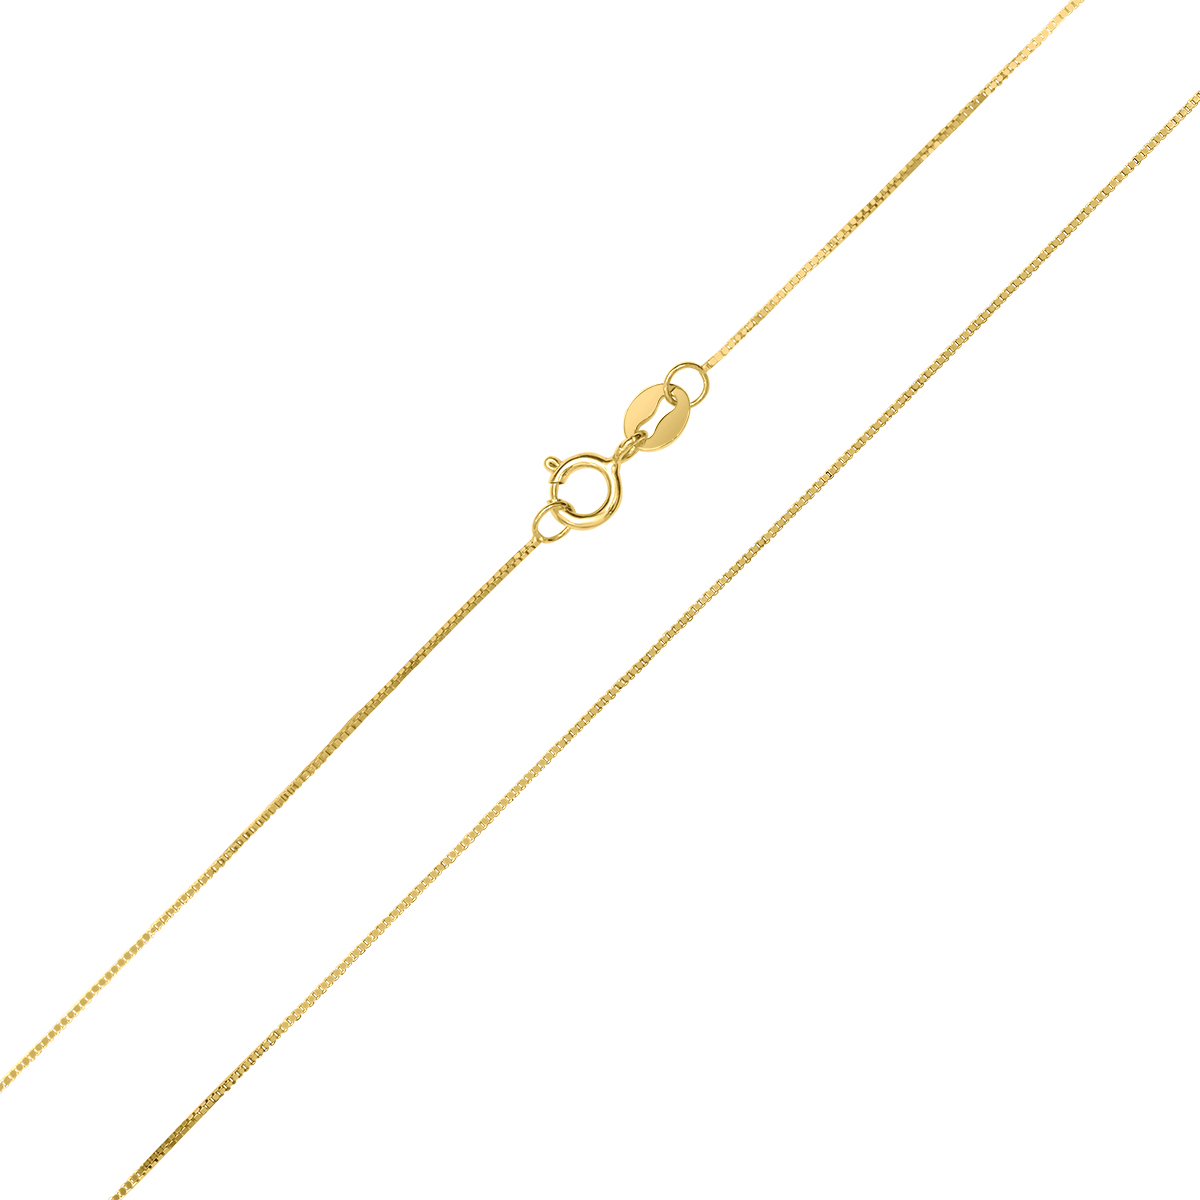 10K Yellow Gold 0.45MM Shiny Box Chain with Spring Ring Clasp - 16 Inch